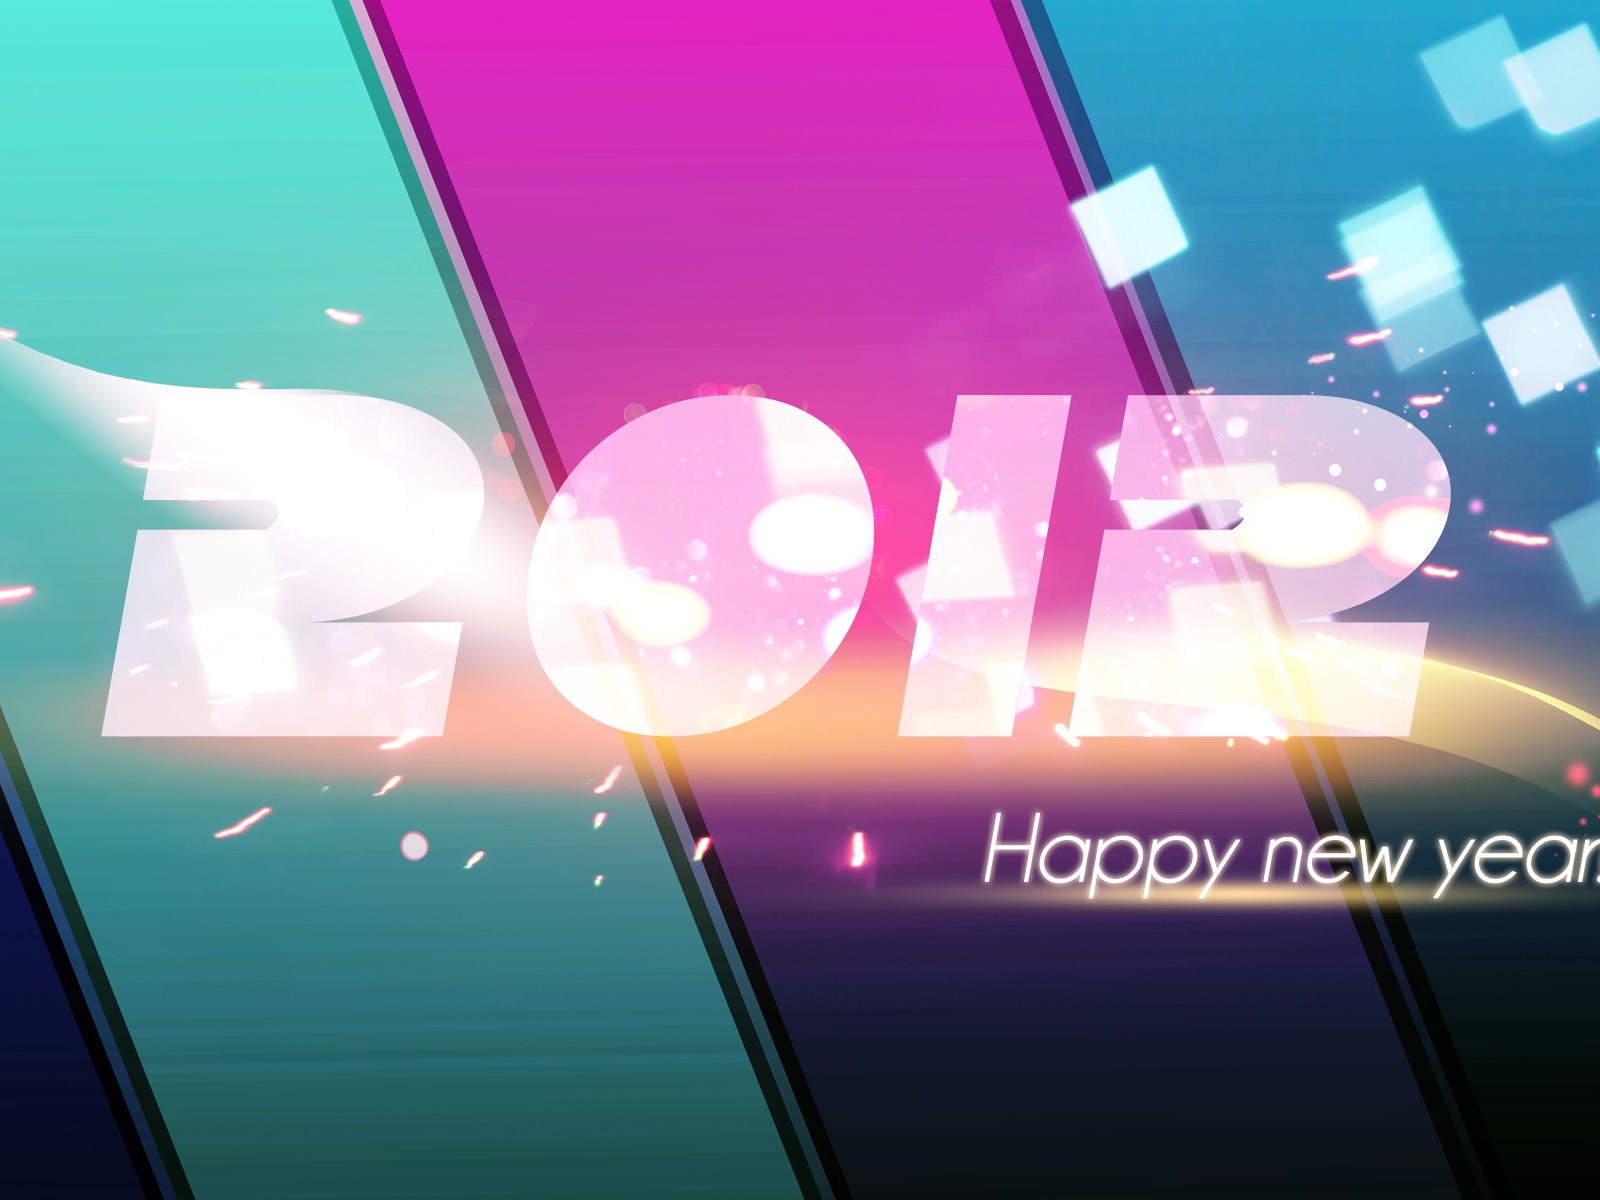 2012 New Year wallpapers (1) #14 - 1600x1200